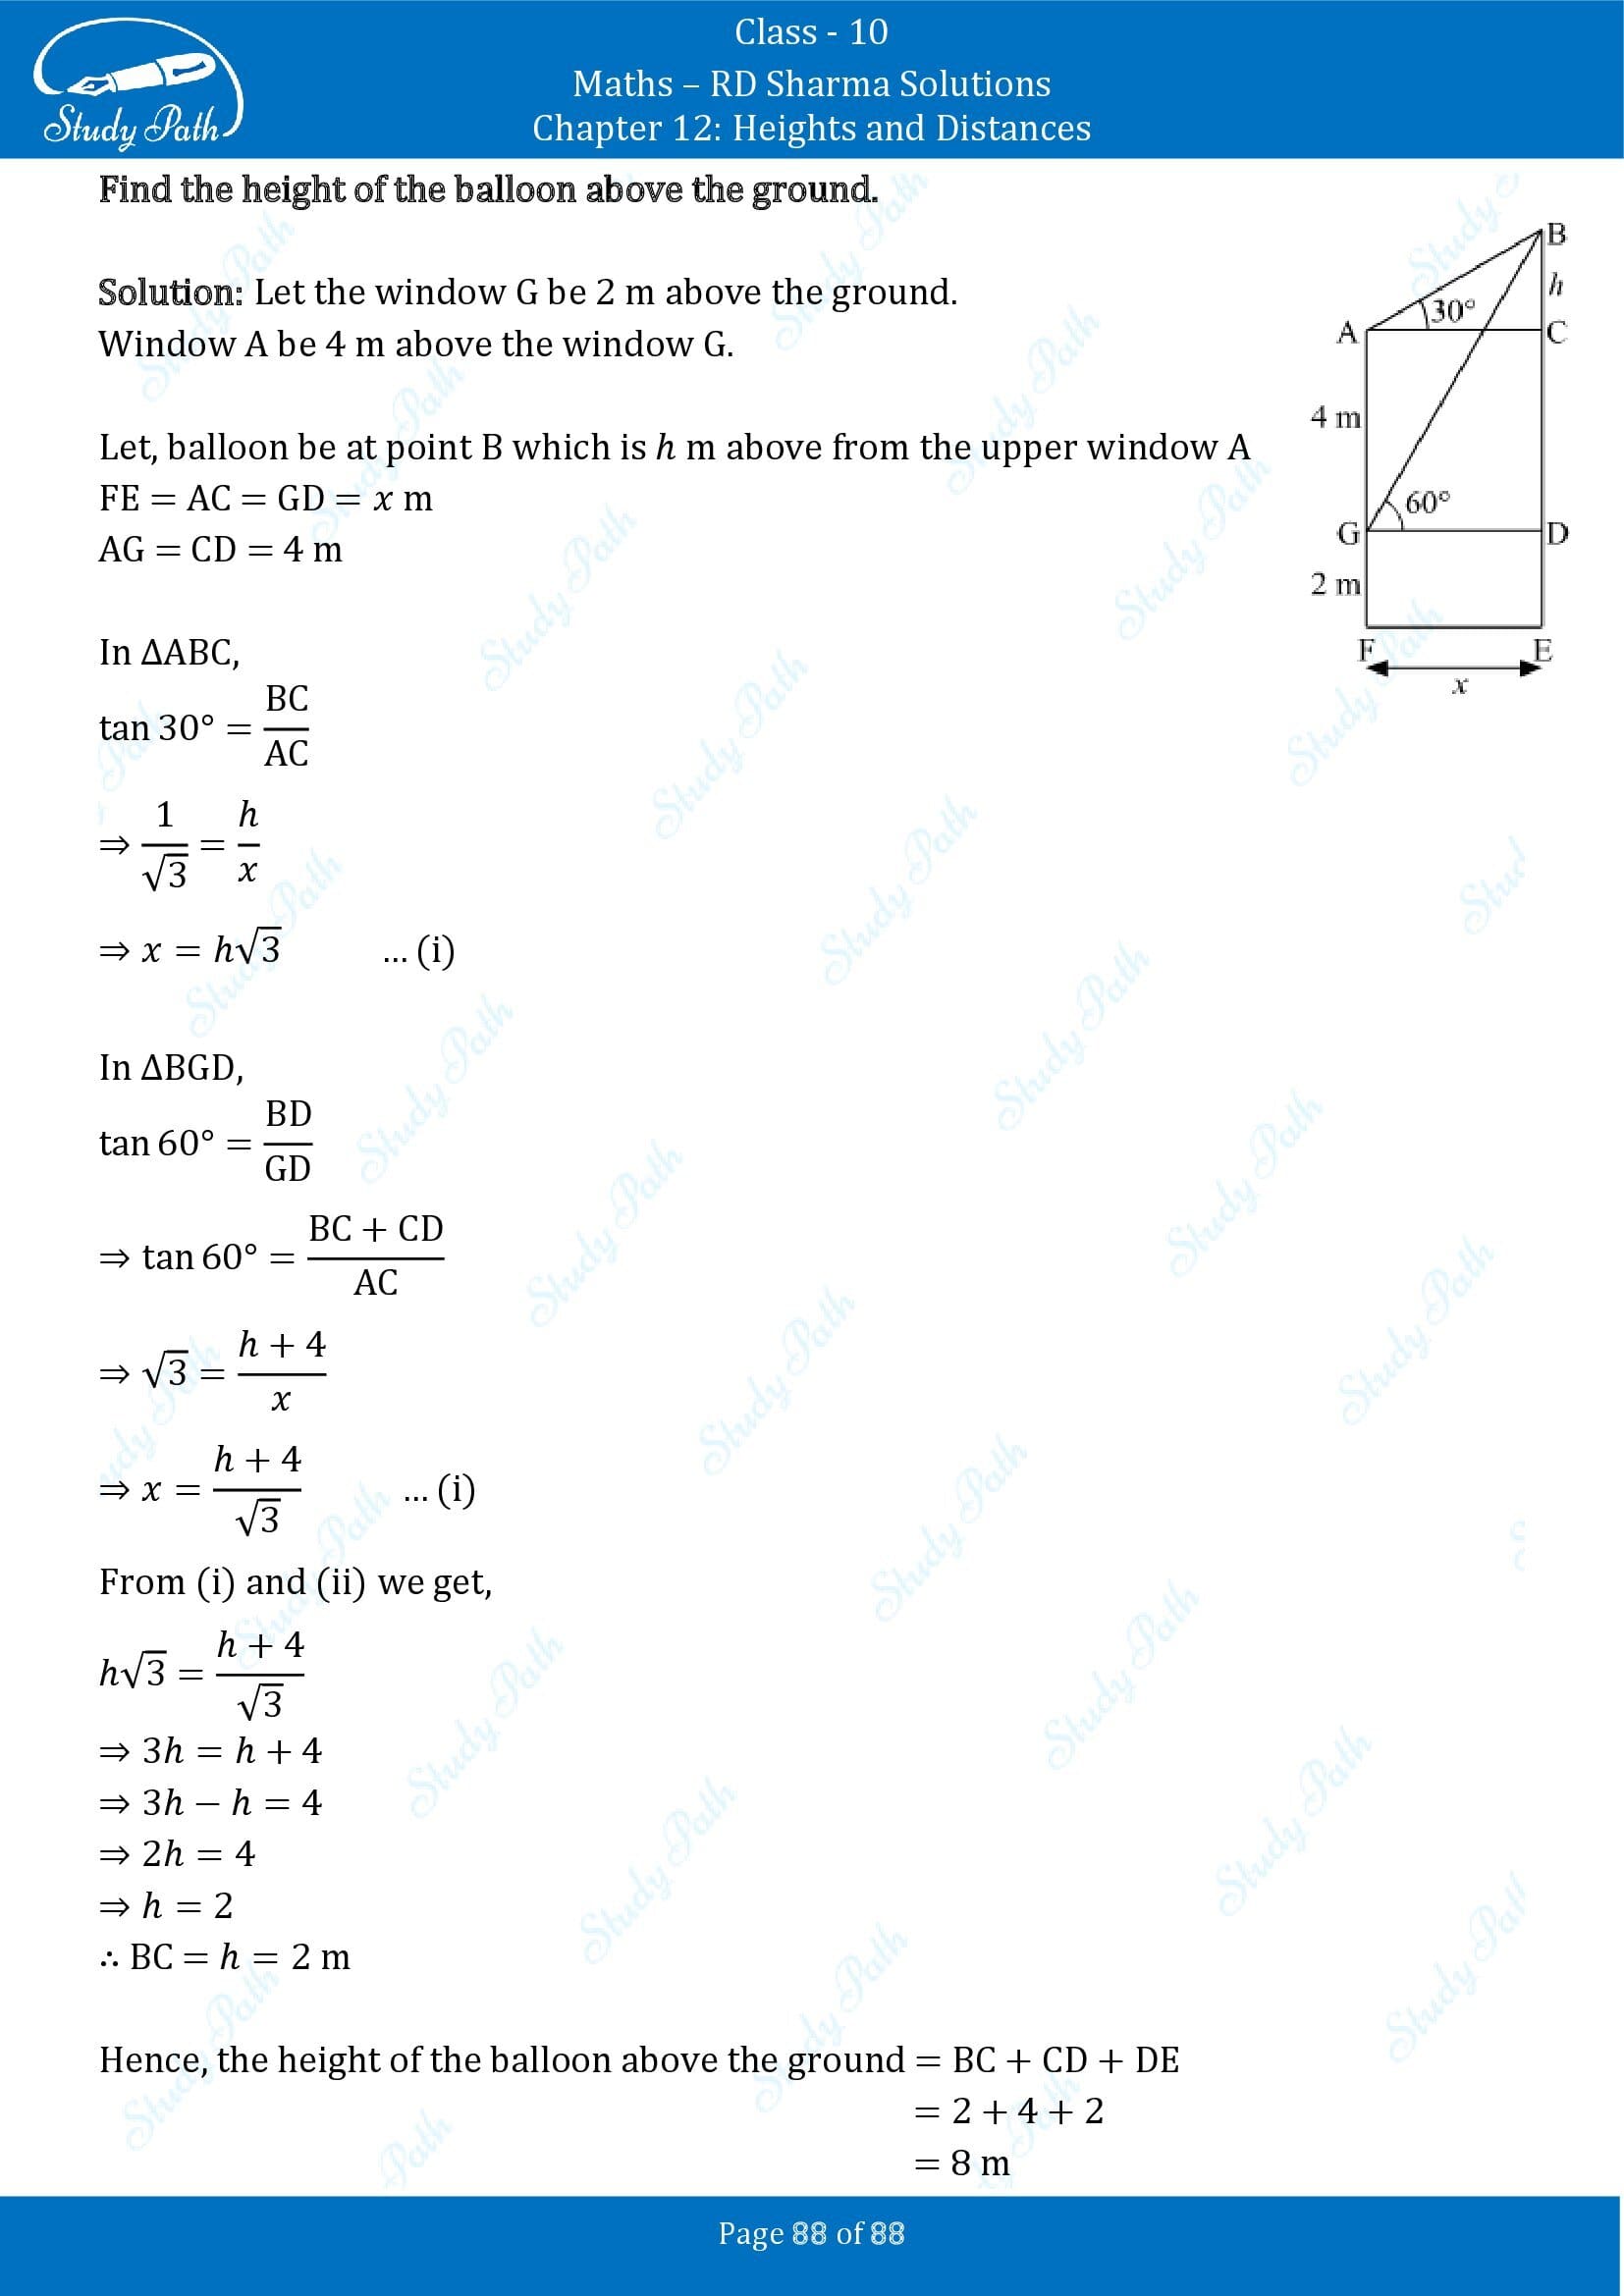 RD Sharma Solutions Class 10 Chapter 12 Heights and Distances Exercise 12.1 00088